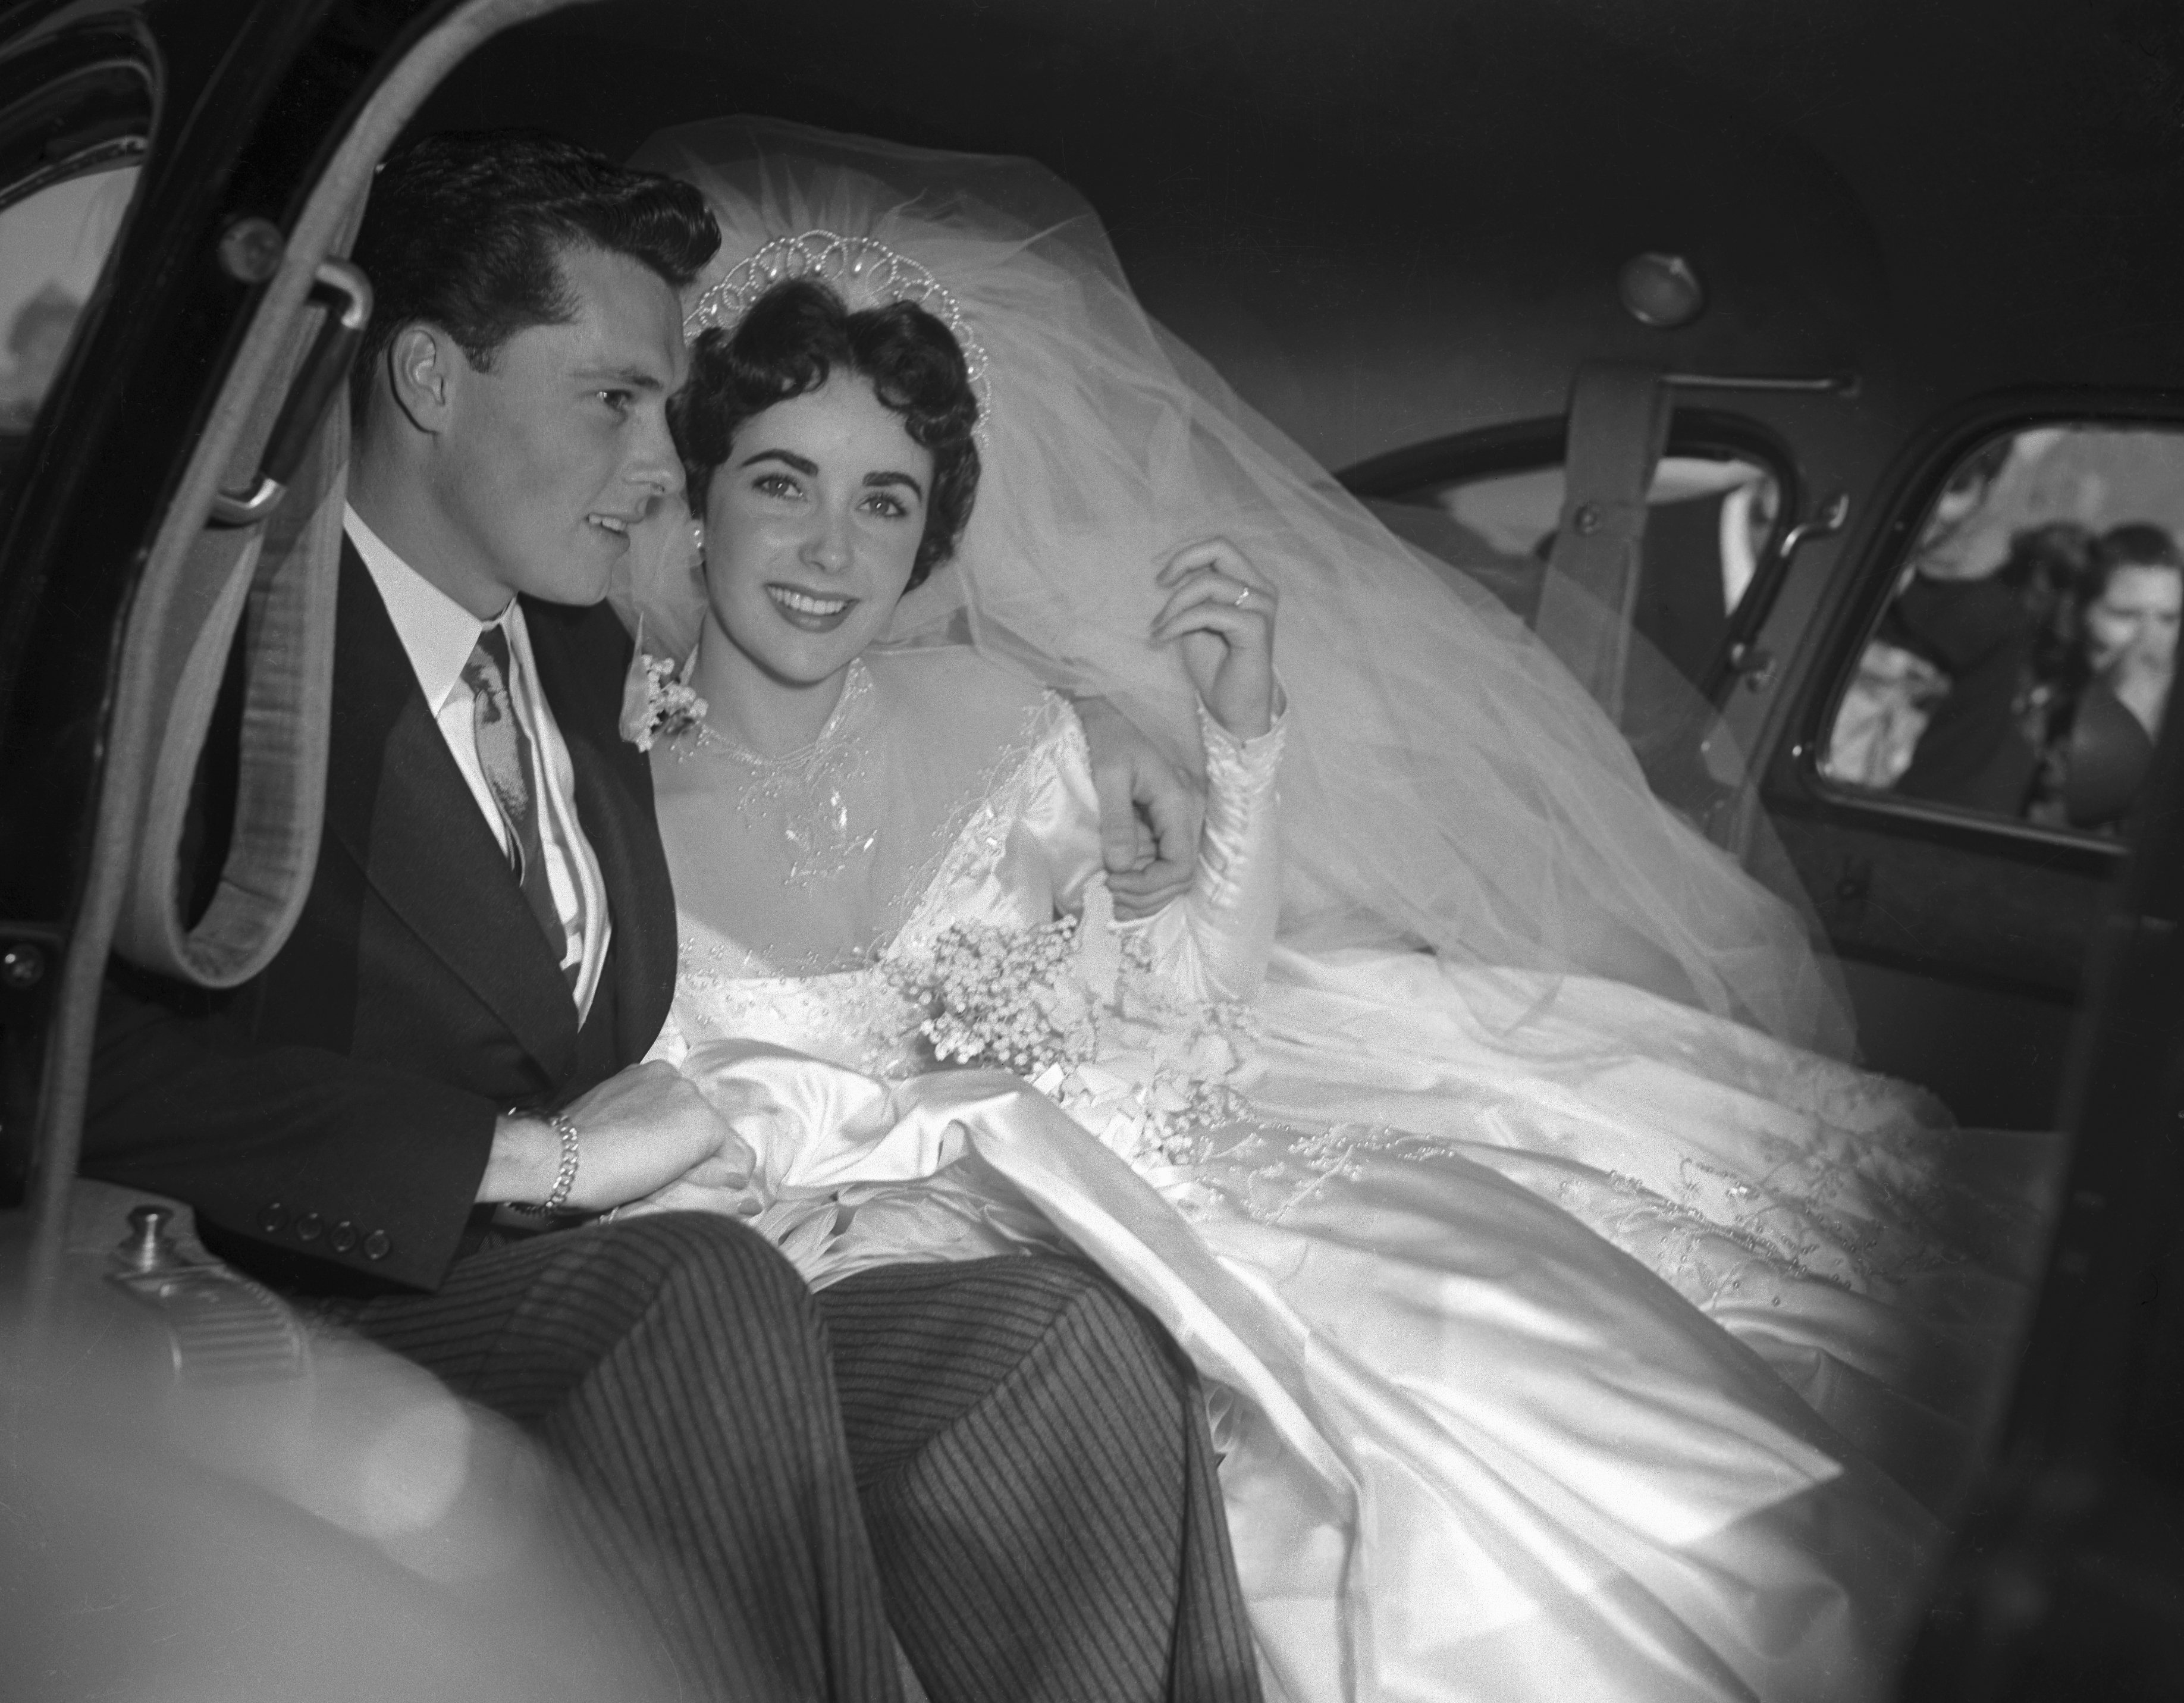 Actress Elizabeth Taylor and Conrad "Nickie" Hilton, Jr. on their wedding day on May 6, 1950. | Source: Getty Images